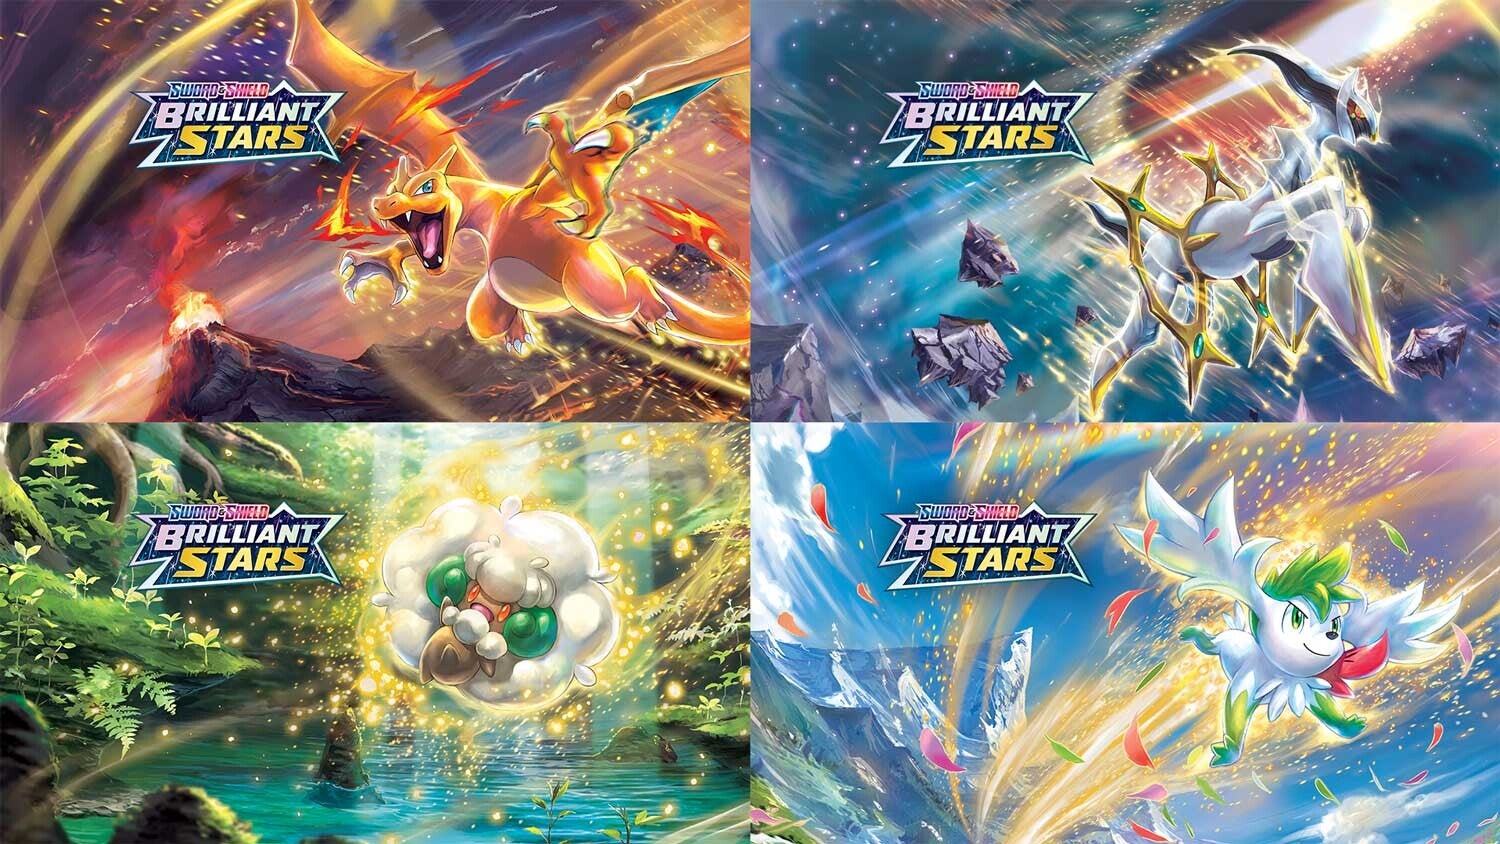 Download brilliant stars wallpapers we bring you the latest pokãmon tcg news every day